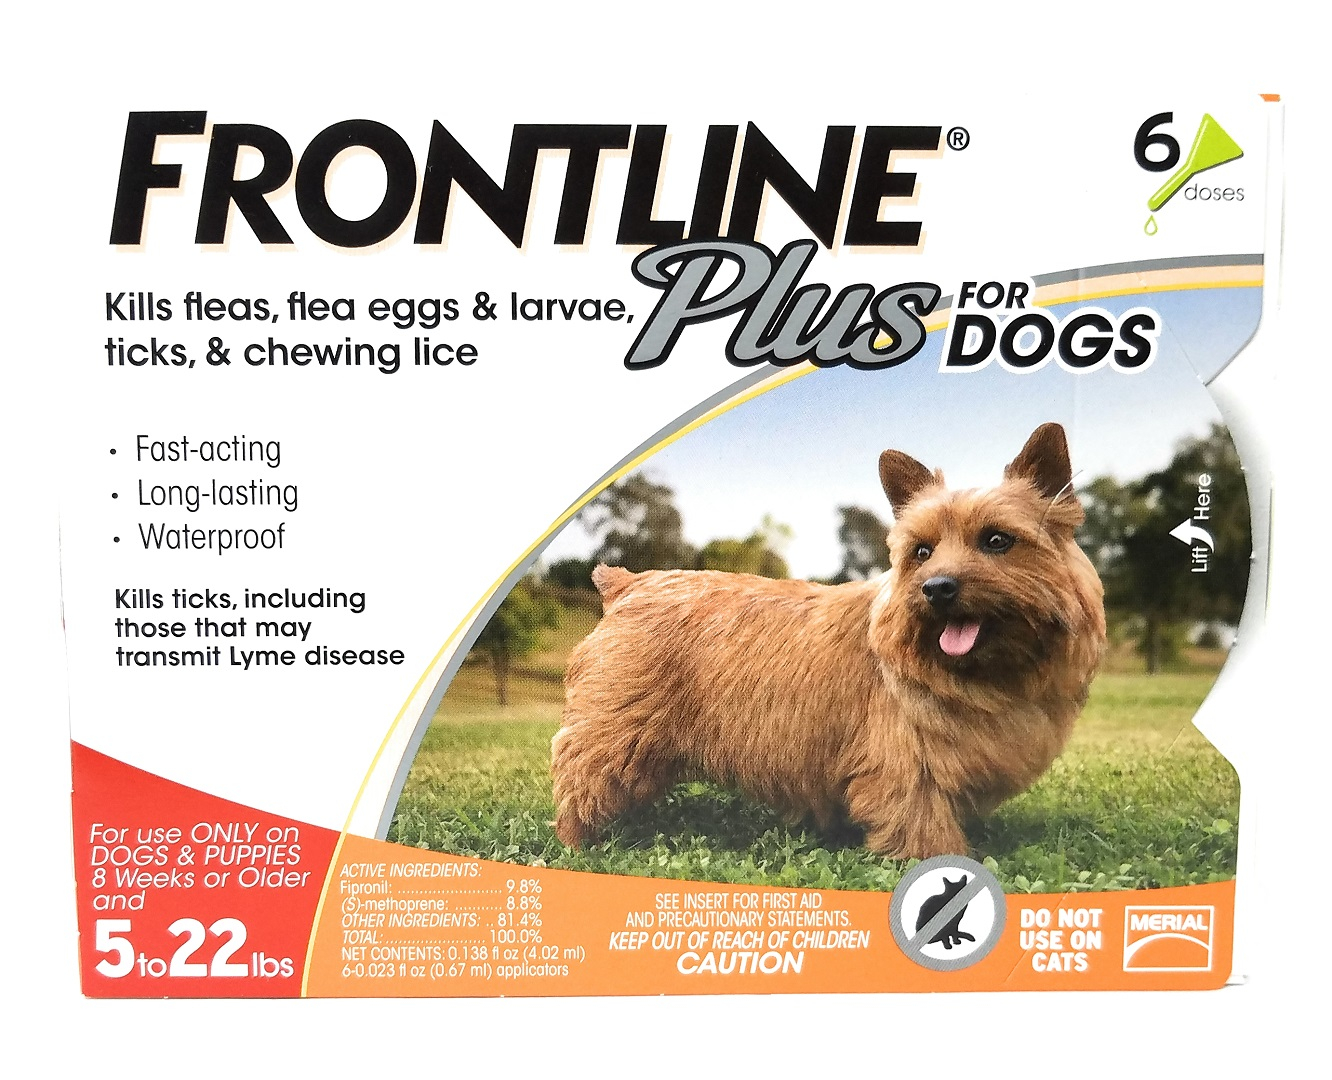 Vet Approved Rx Frontline Plus for Dogs up to 22 lbs-6 Doses